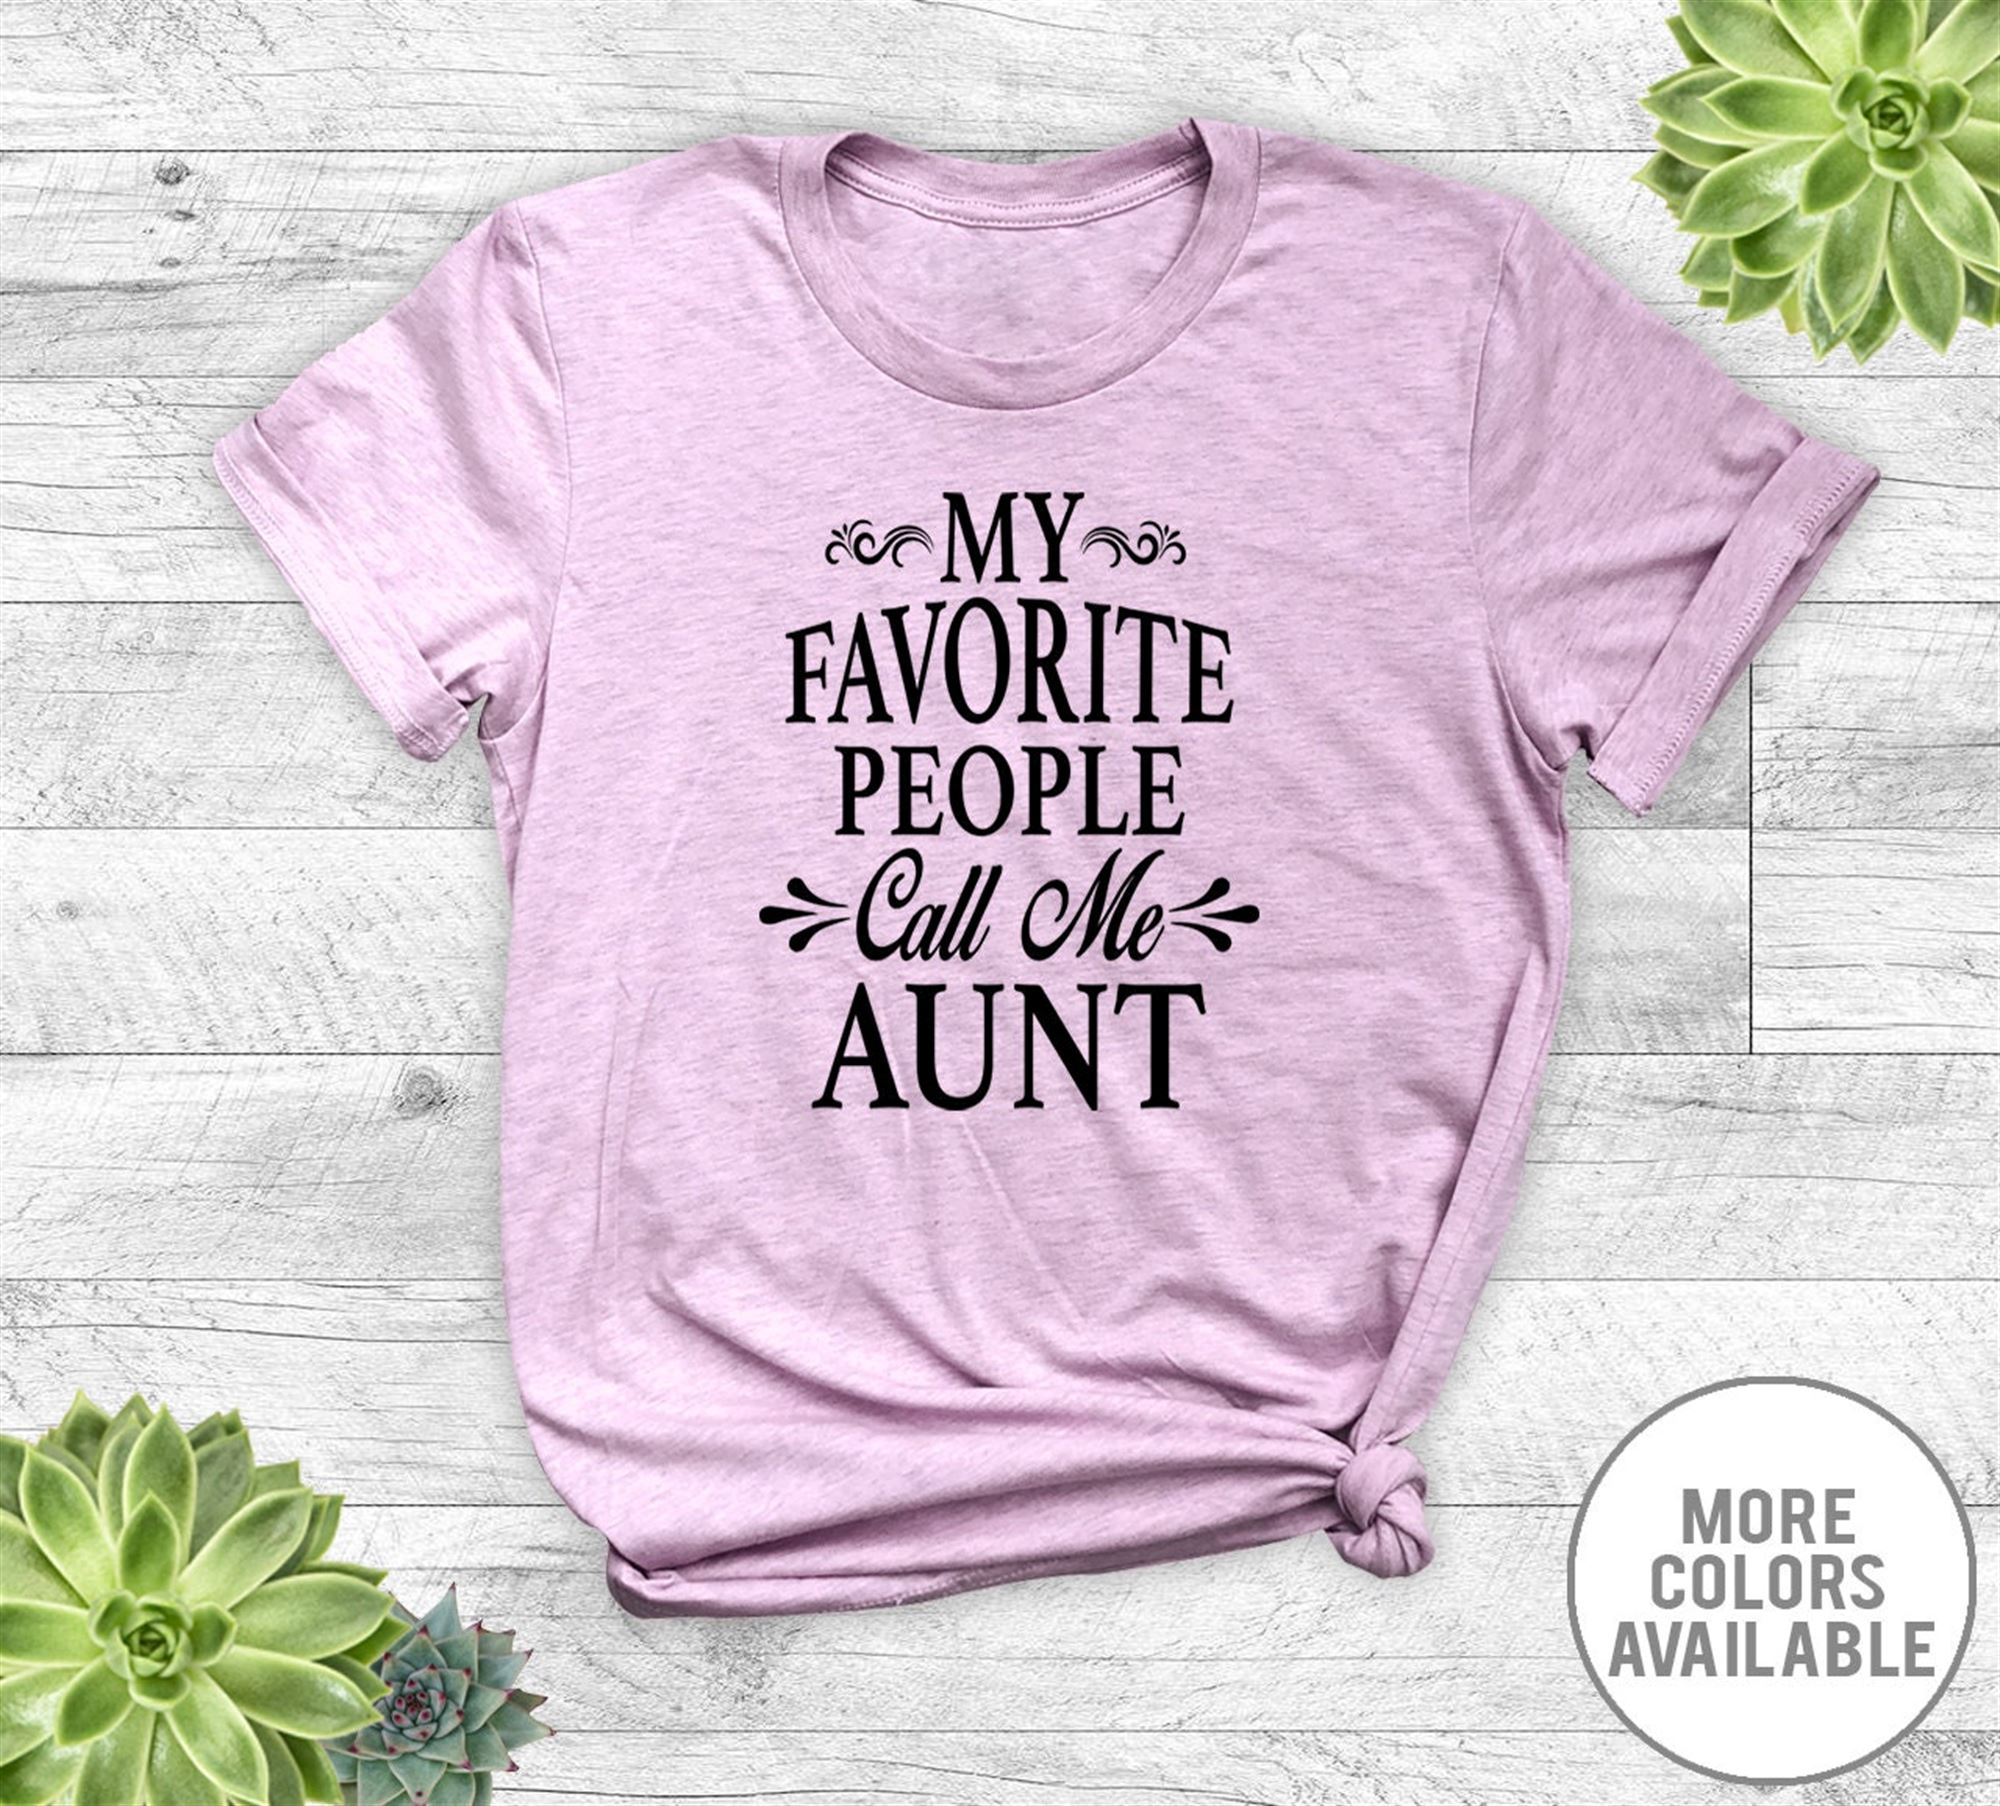 Gifts My Favorite People Call Me Aunt - Unisex T-shirt - Aunt Shirt - Aunt Gift 